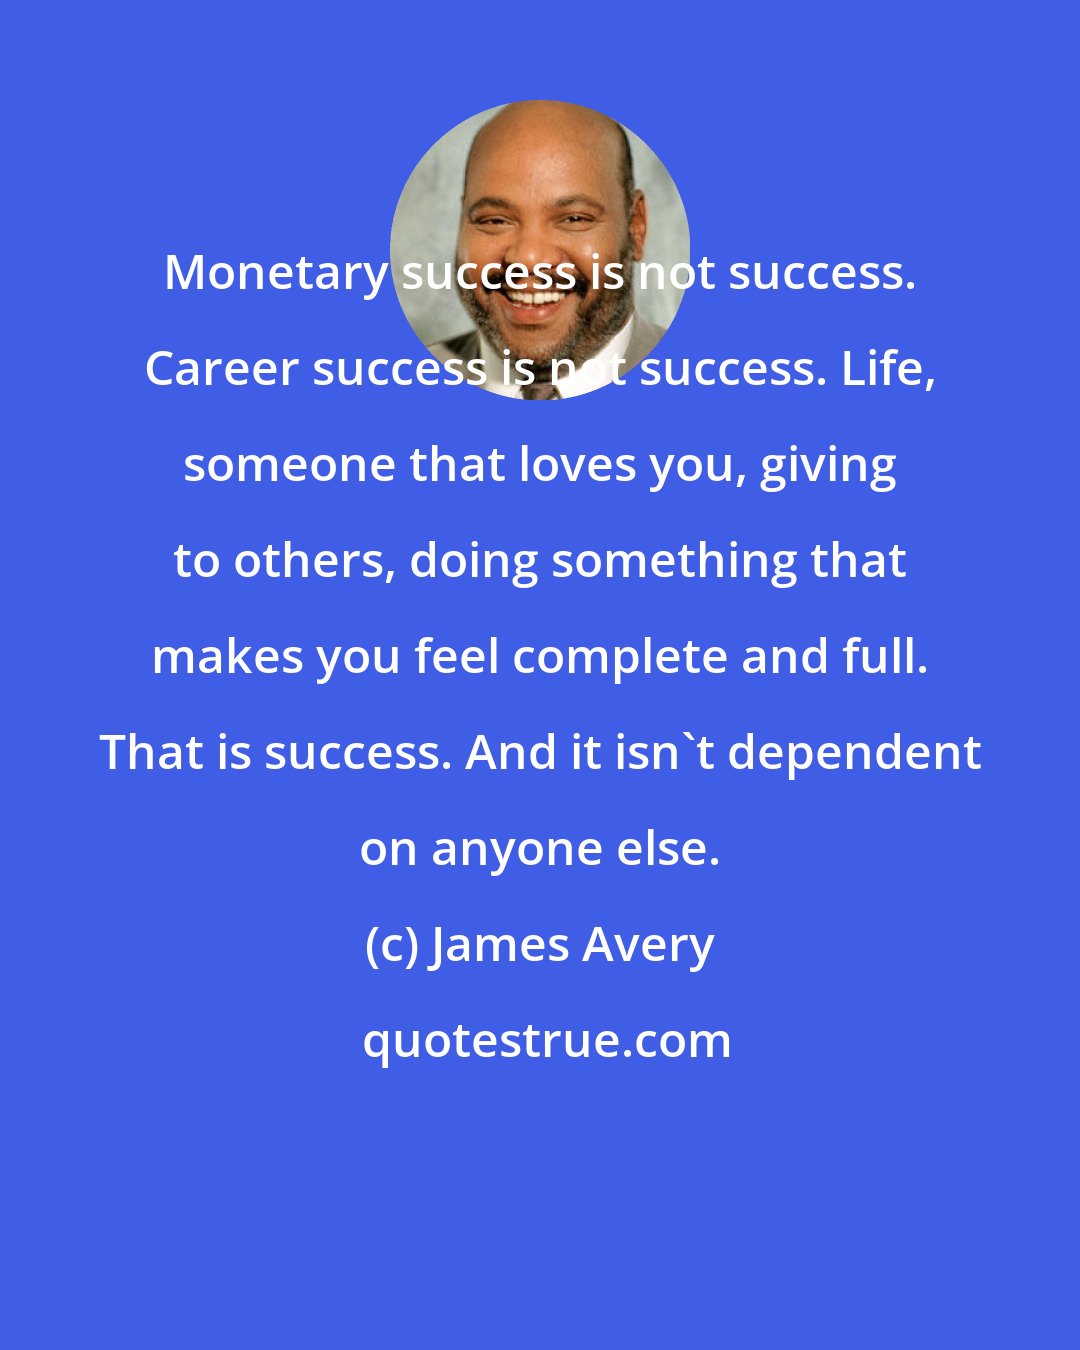 James Avery: Monetary success is not success. Career success is not success. Life, someone that loves you, giving to others, doing something that makes you feel complete and full. That is success. And it isn't dependent on anyone else.